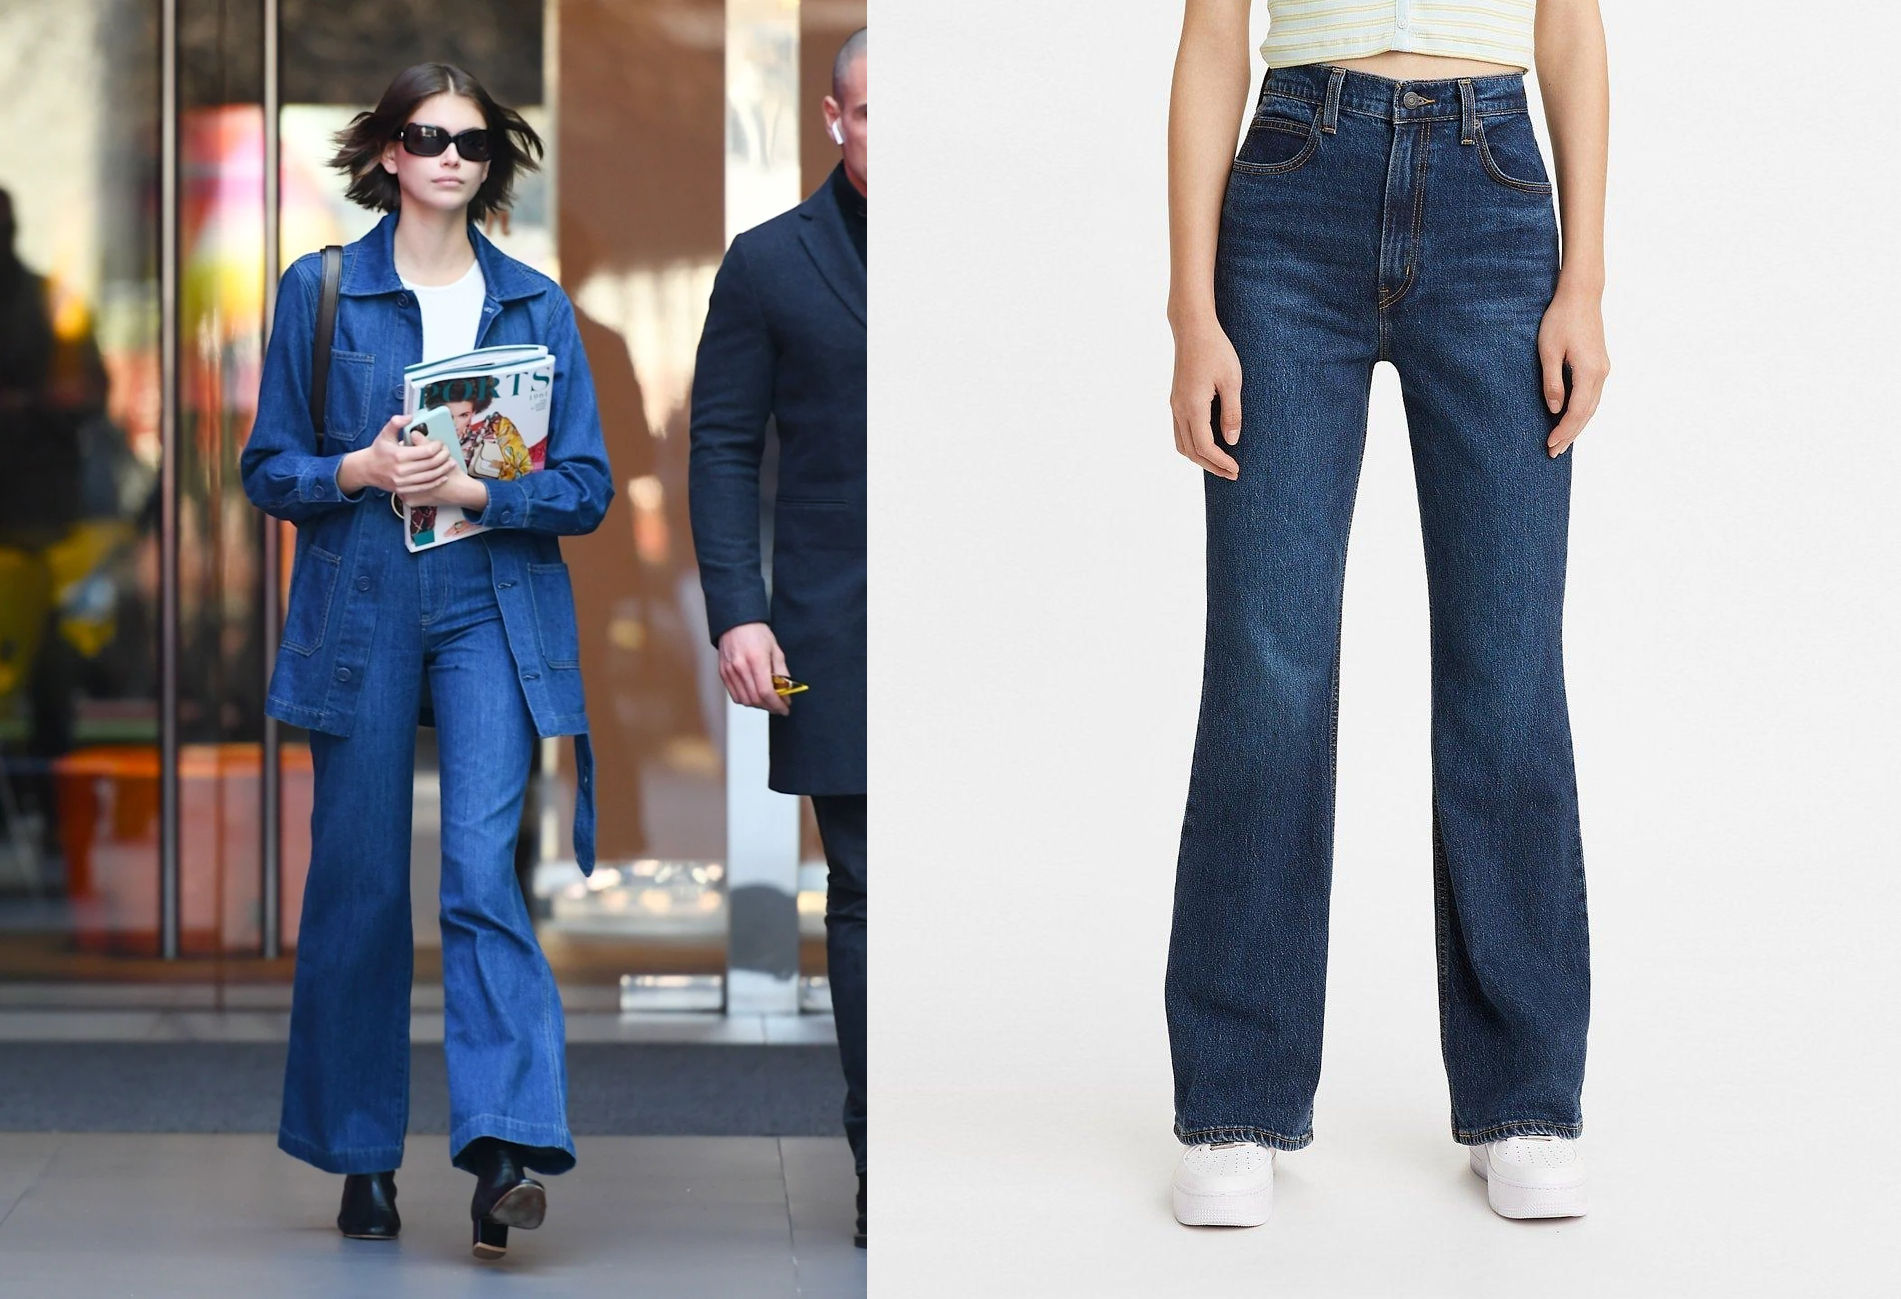 70s denim trend is back! Here's to wear and flaunt flare jeans